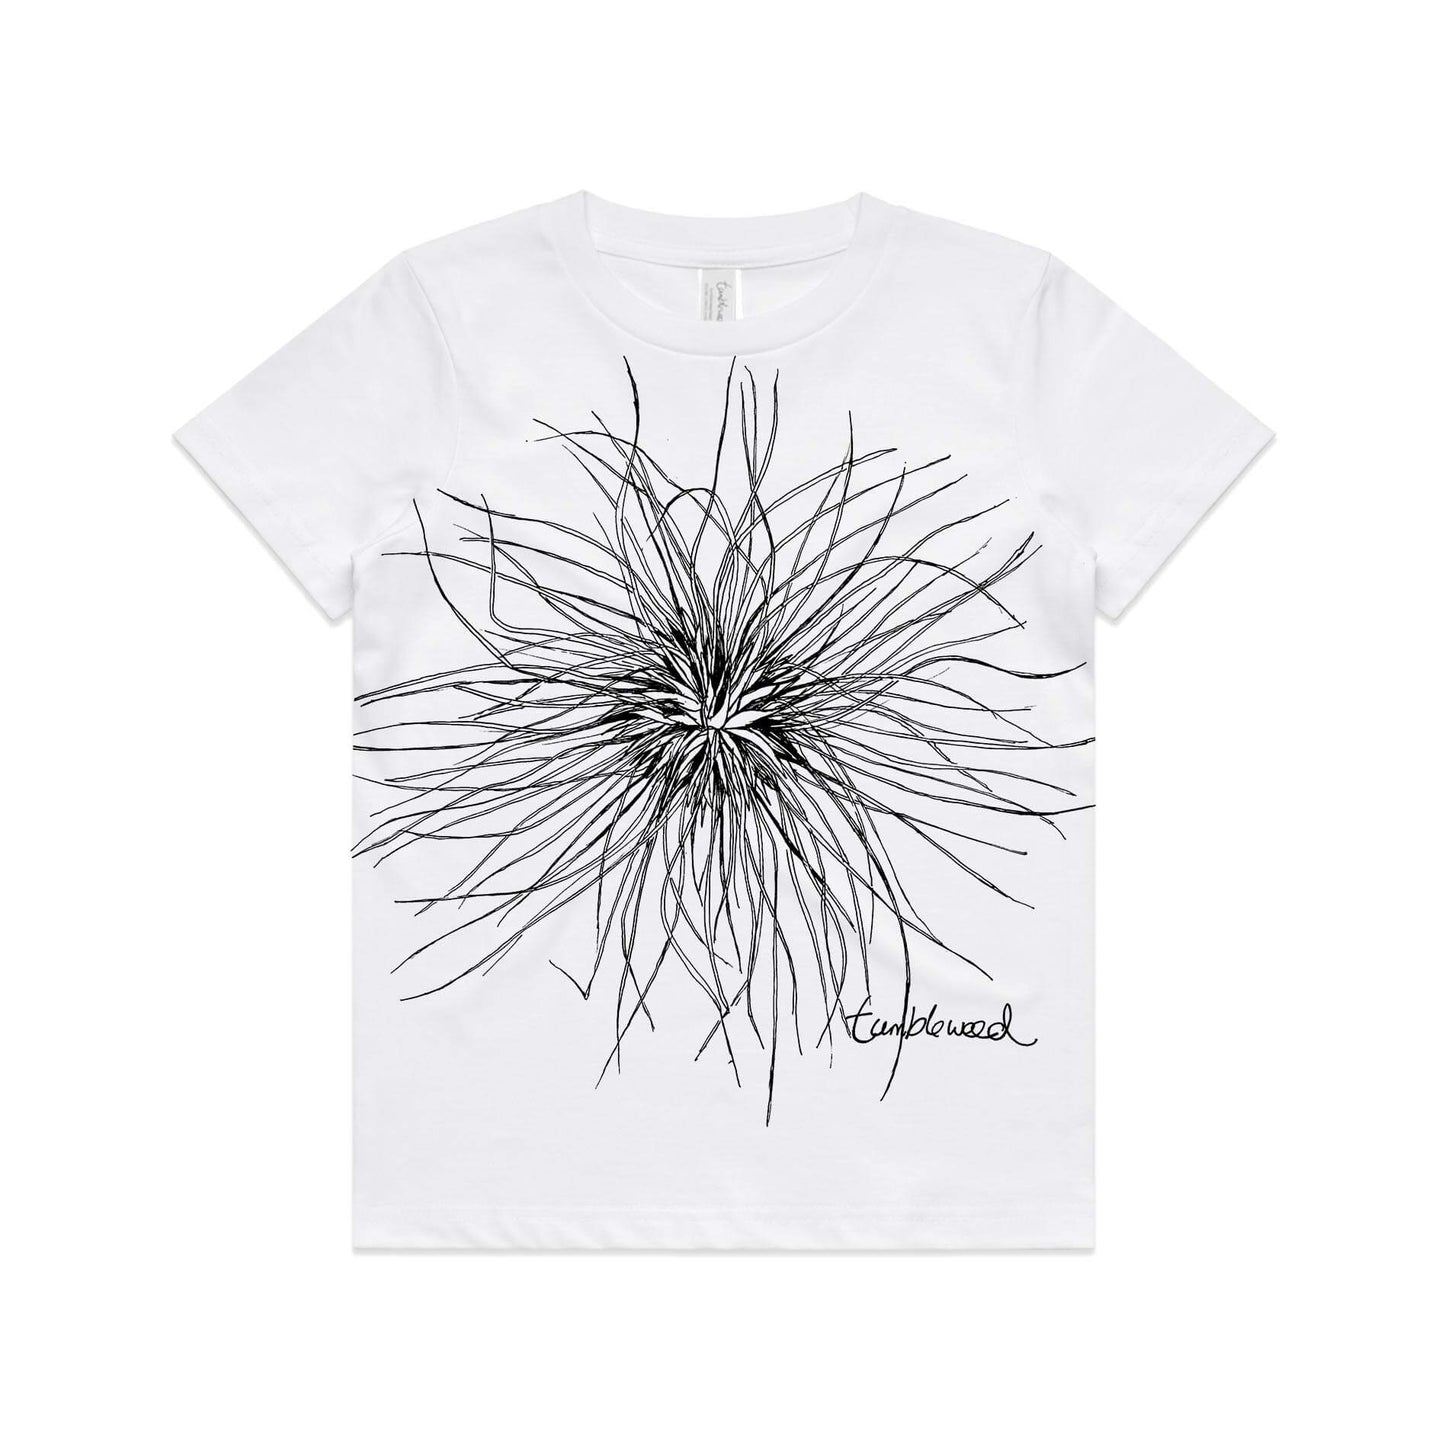 White, cotton kids' t-shirt with screen printed Kids tumbleweed/spinifex design.